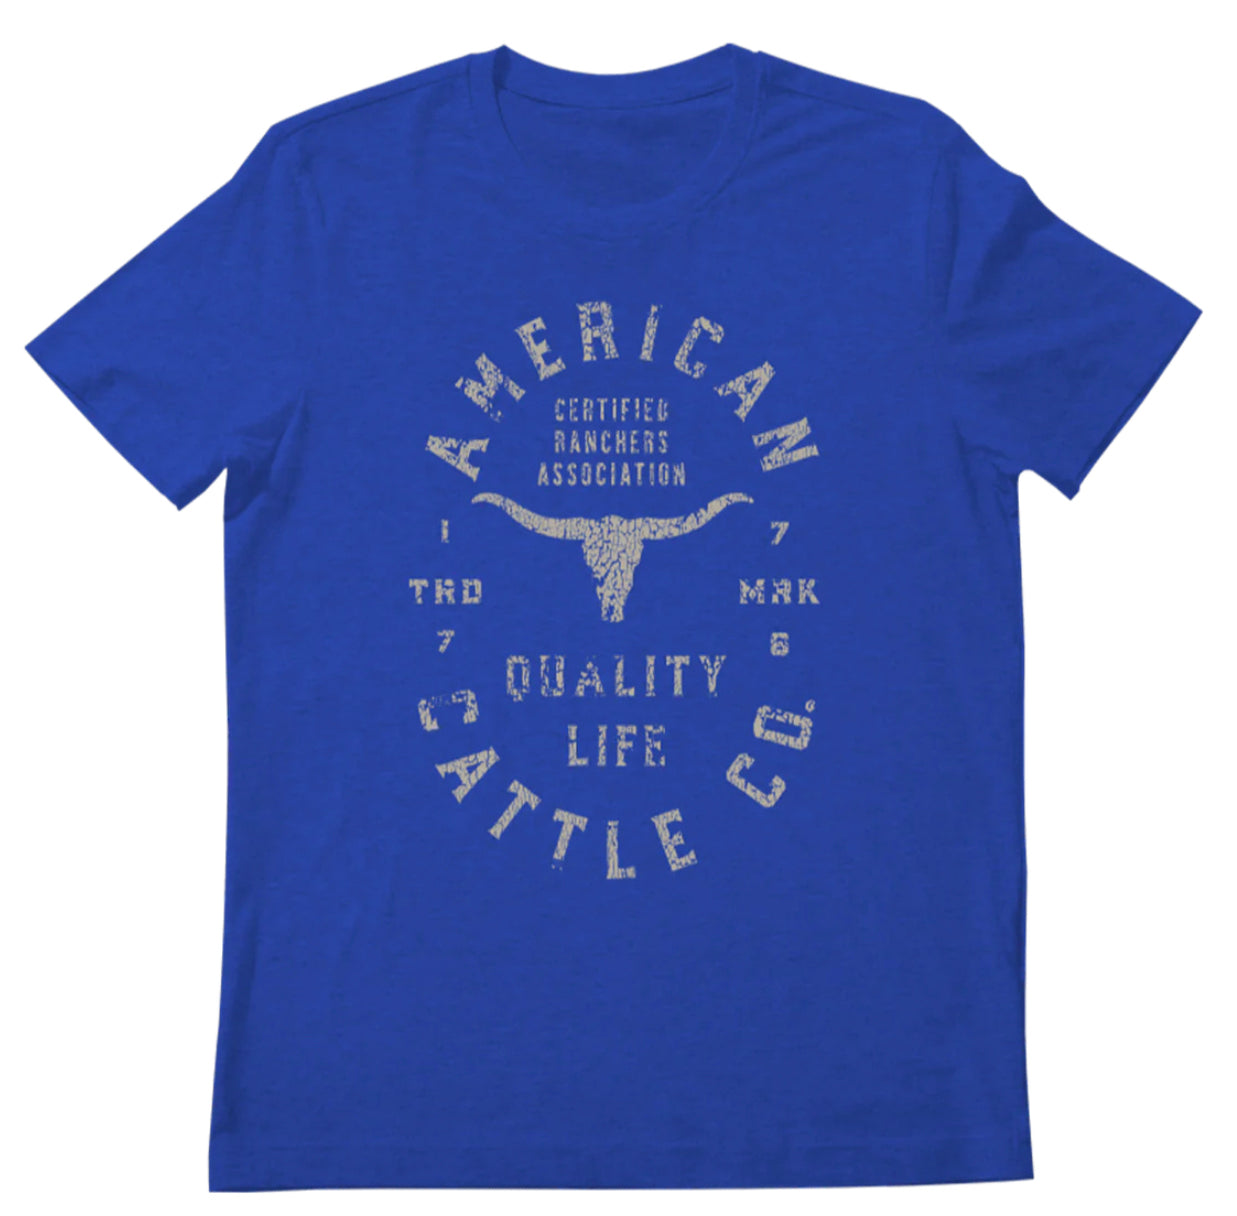 American Cattle Co. Quality Life Graphic Tee in Royal Heather